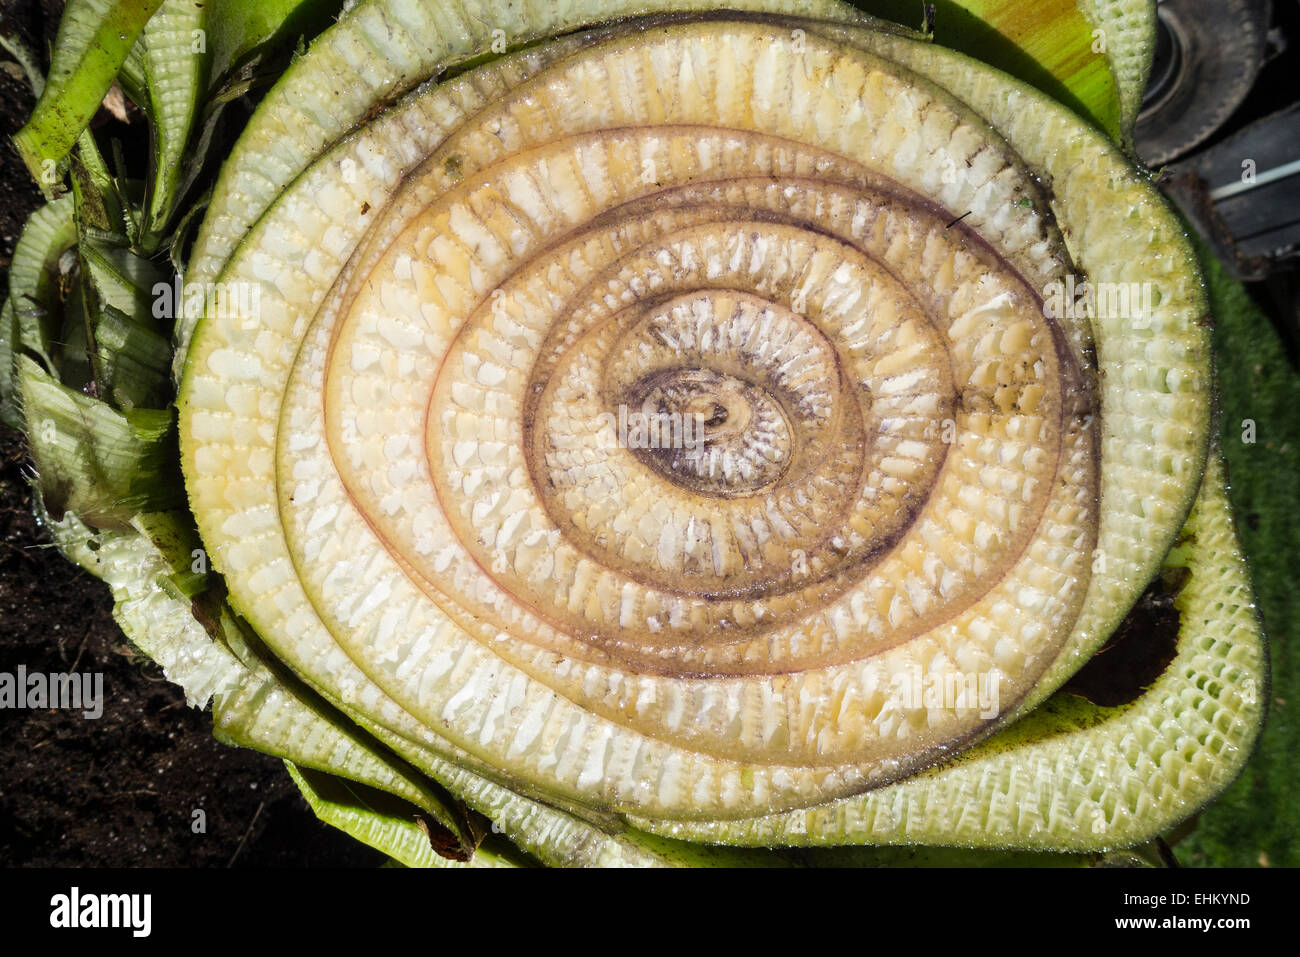 A top view cross section and central growth core of a recently severed trunk of a musa bajoo, Japanese fiber banana plant Stock Photo